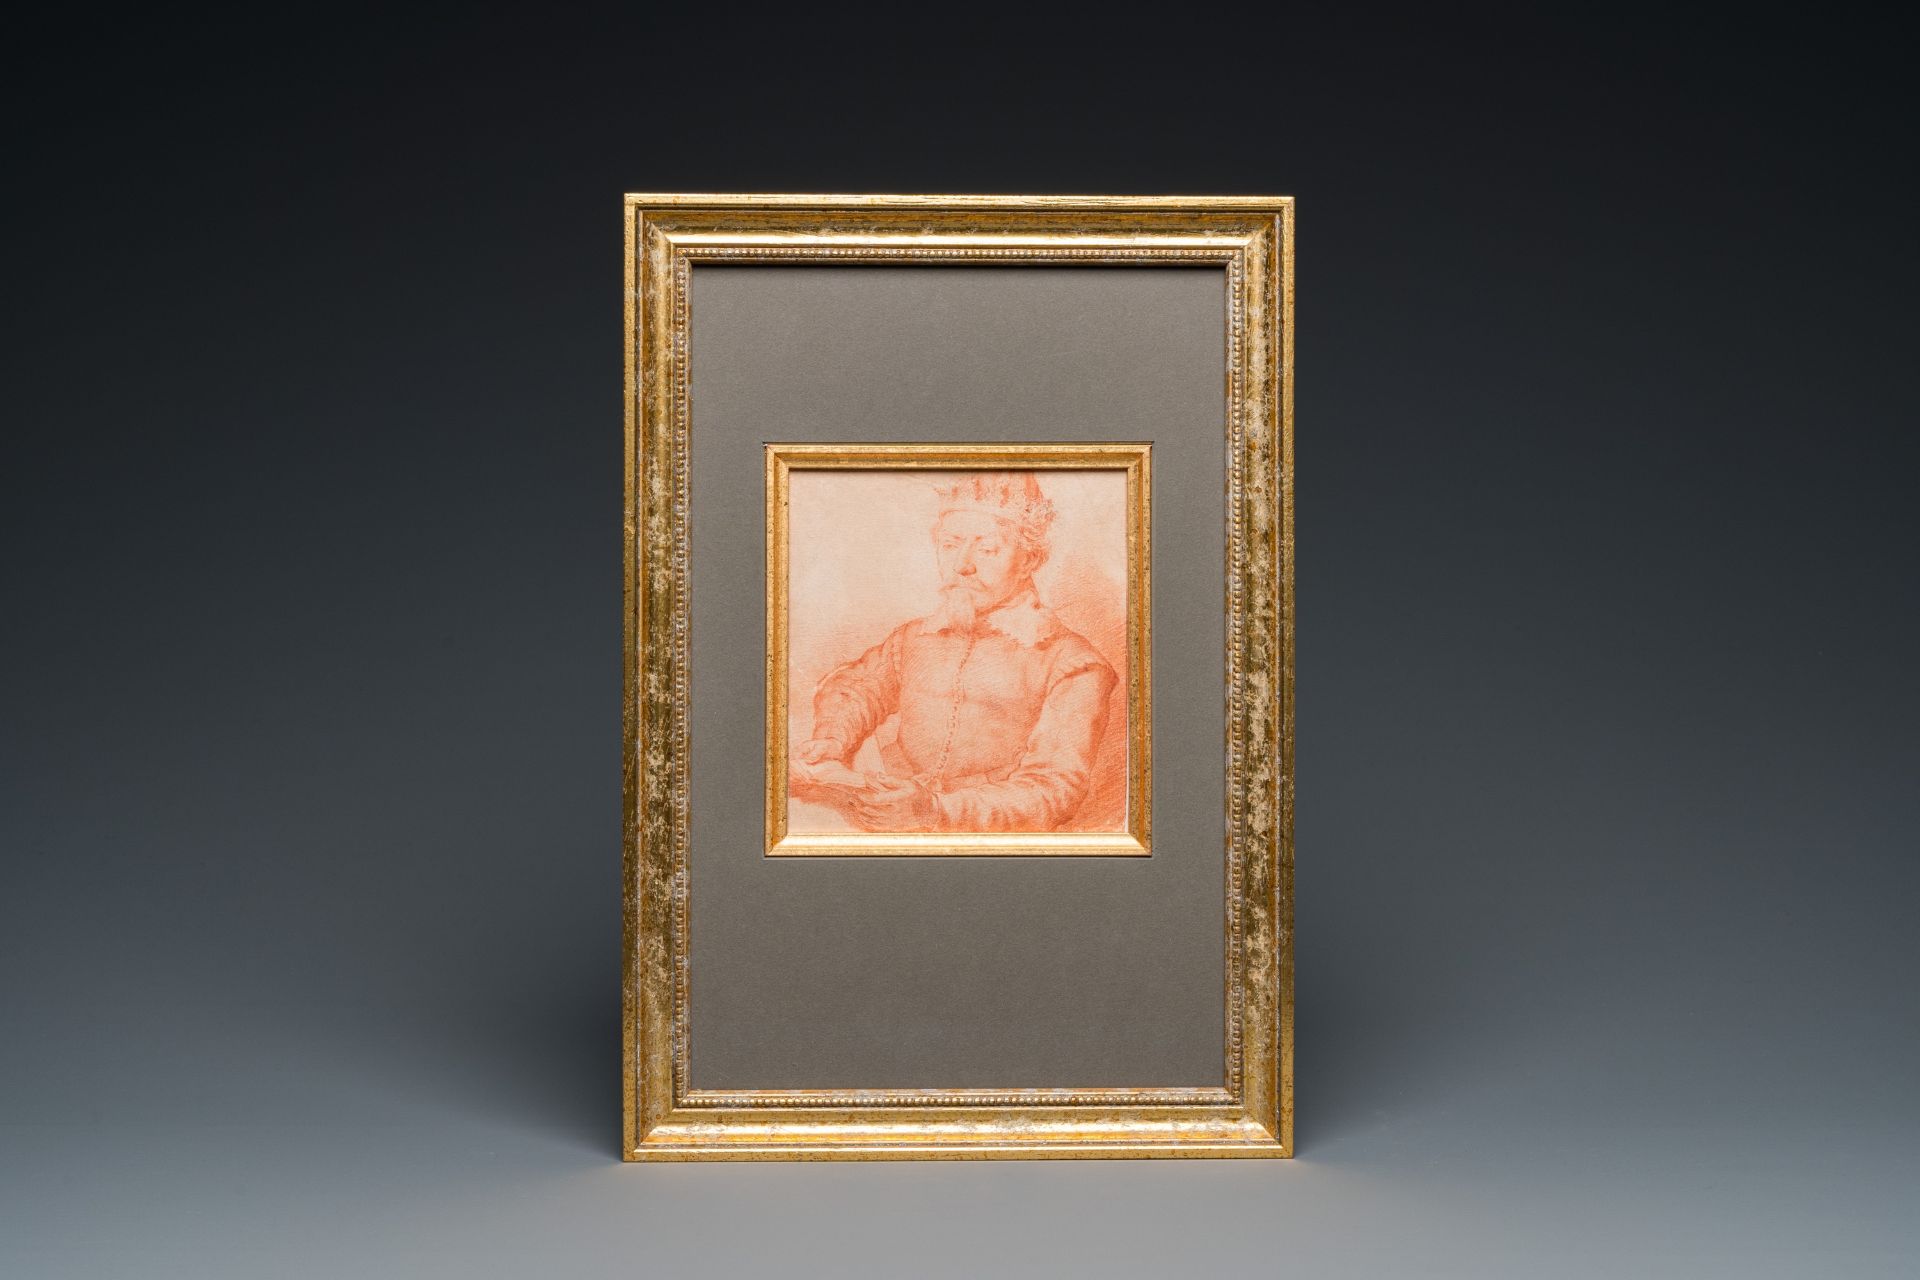 Cornelis Visscher II (1628-1658, attr. to): 'Portrait of a king', red chalk on paper - Image 2 of 3